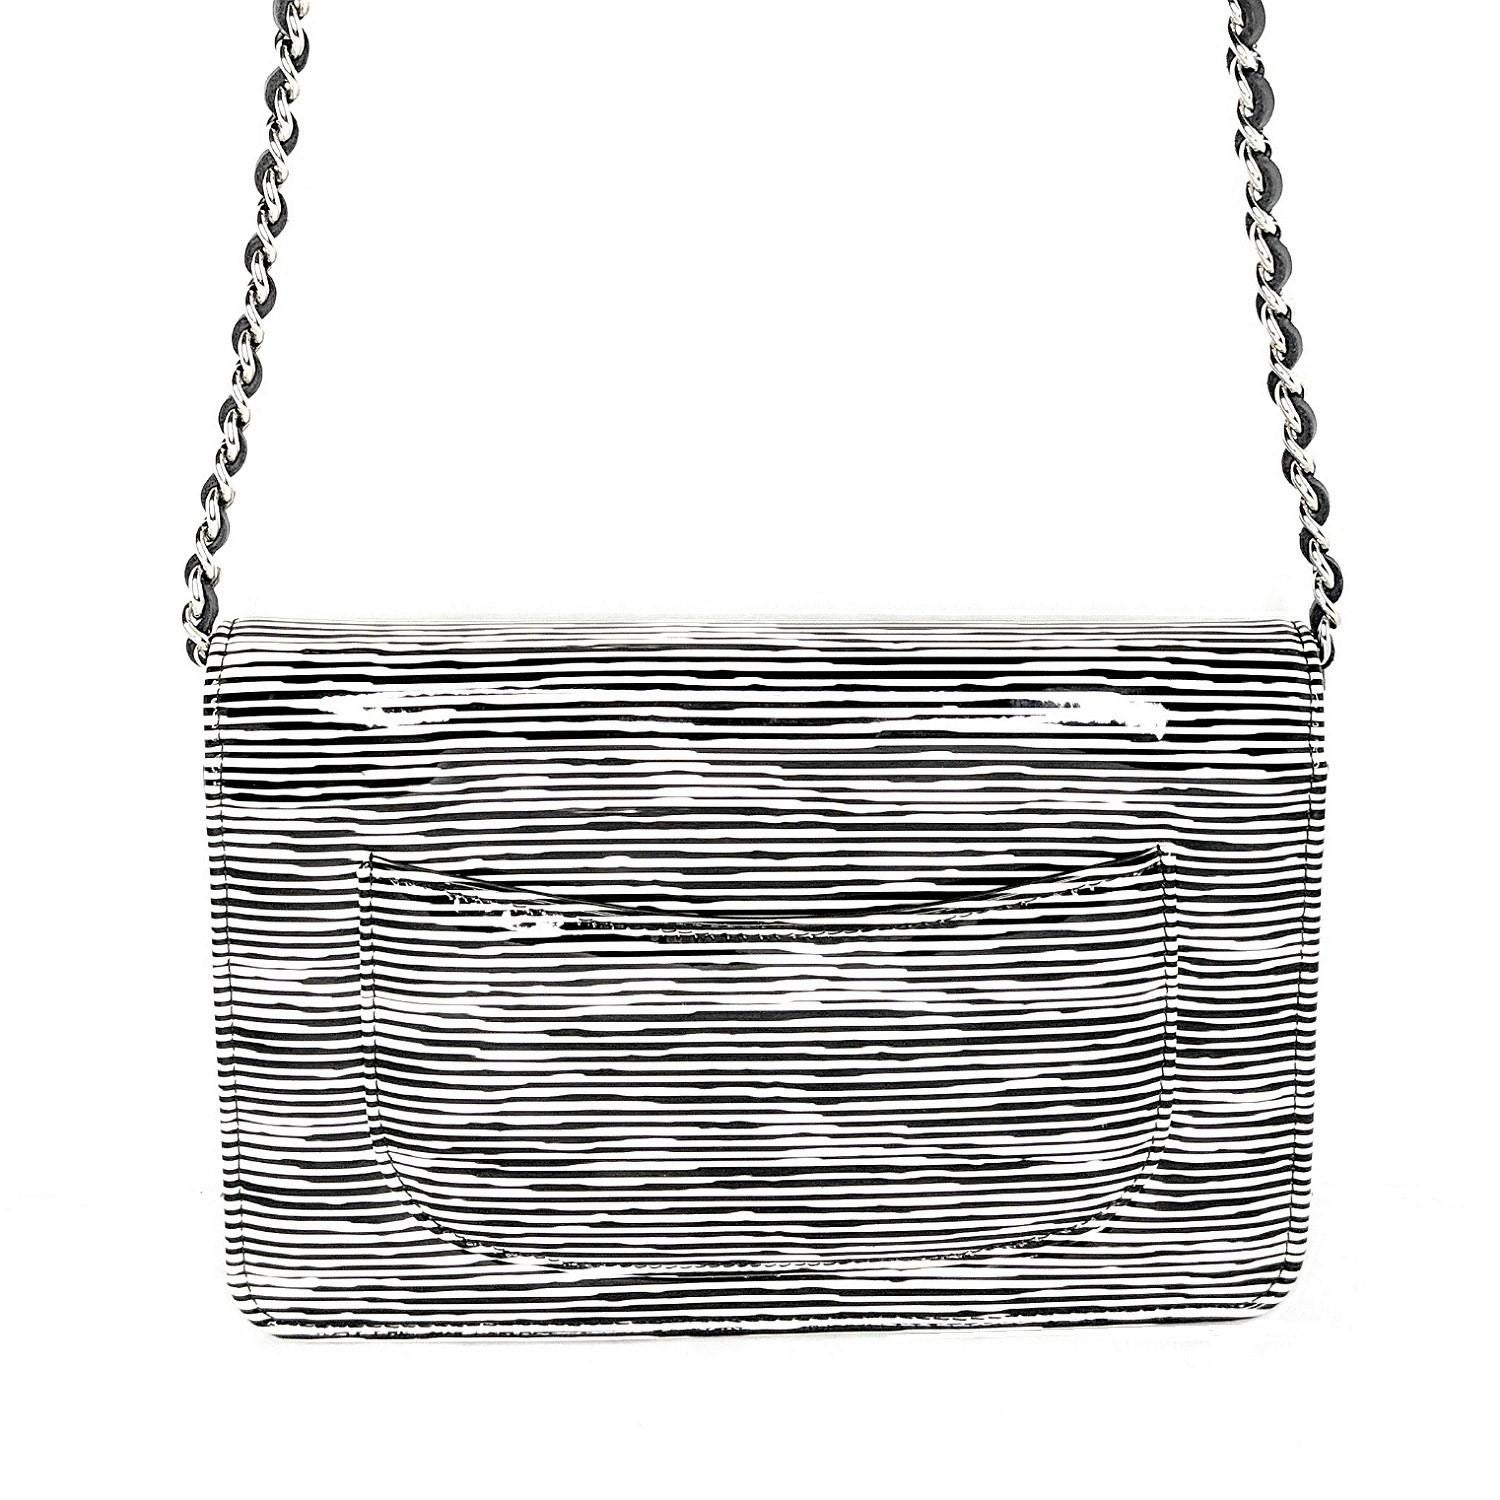 From the Resort 2014 Collection; Chanel Wallet on Chain Striped Patent, crafted from black and white striped printed patent Calfskin leather, features woven-in leather chain strap, interlocking CC logo on its flap, and silver-tone hardware. Its